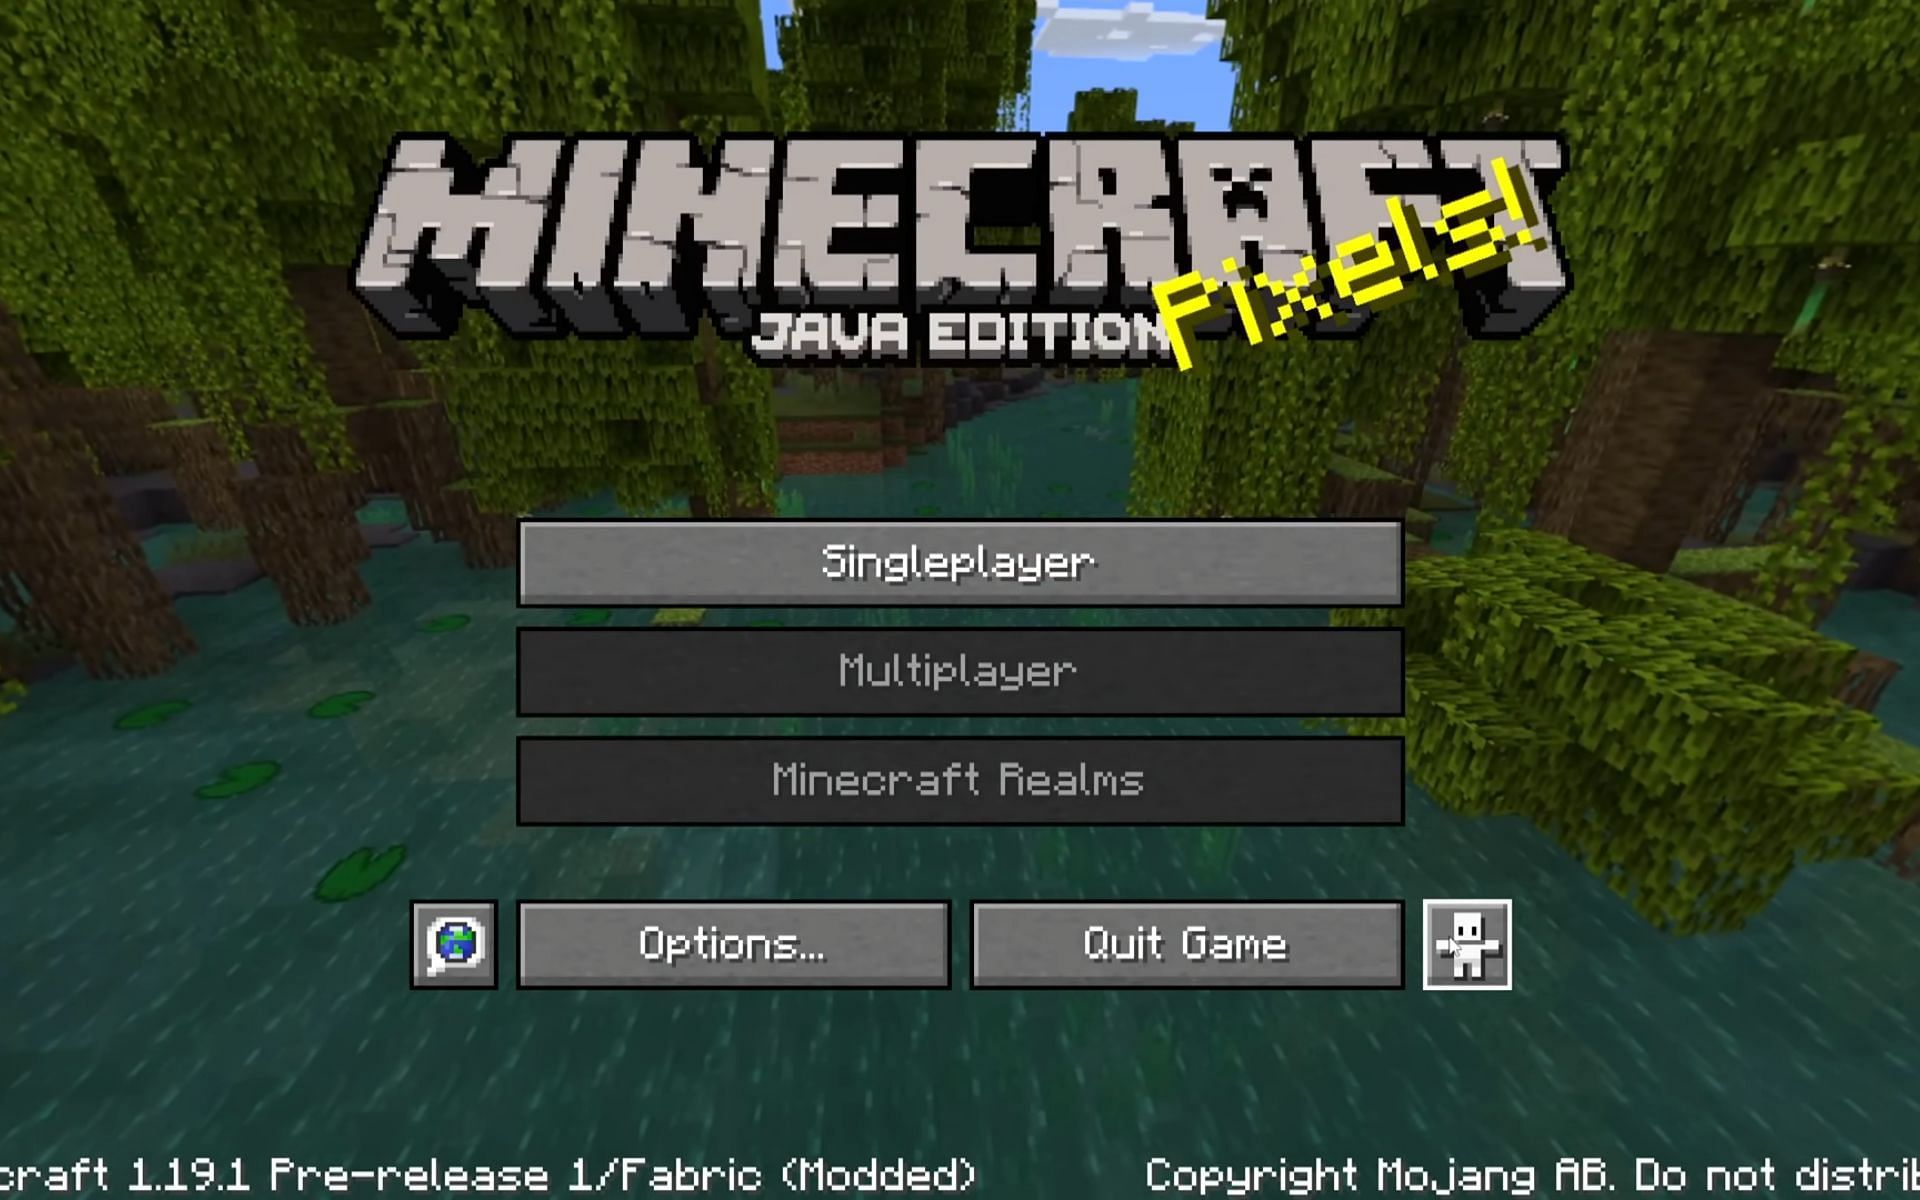 Multiplayer and Realms game modes will not be accessible after a ban (Image via Minecraft)